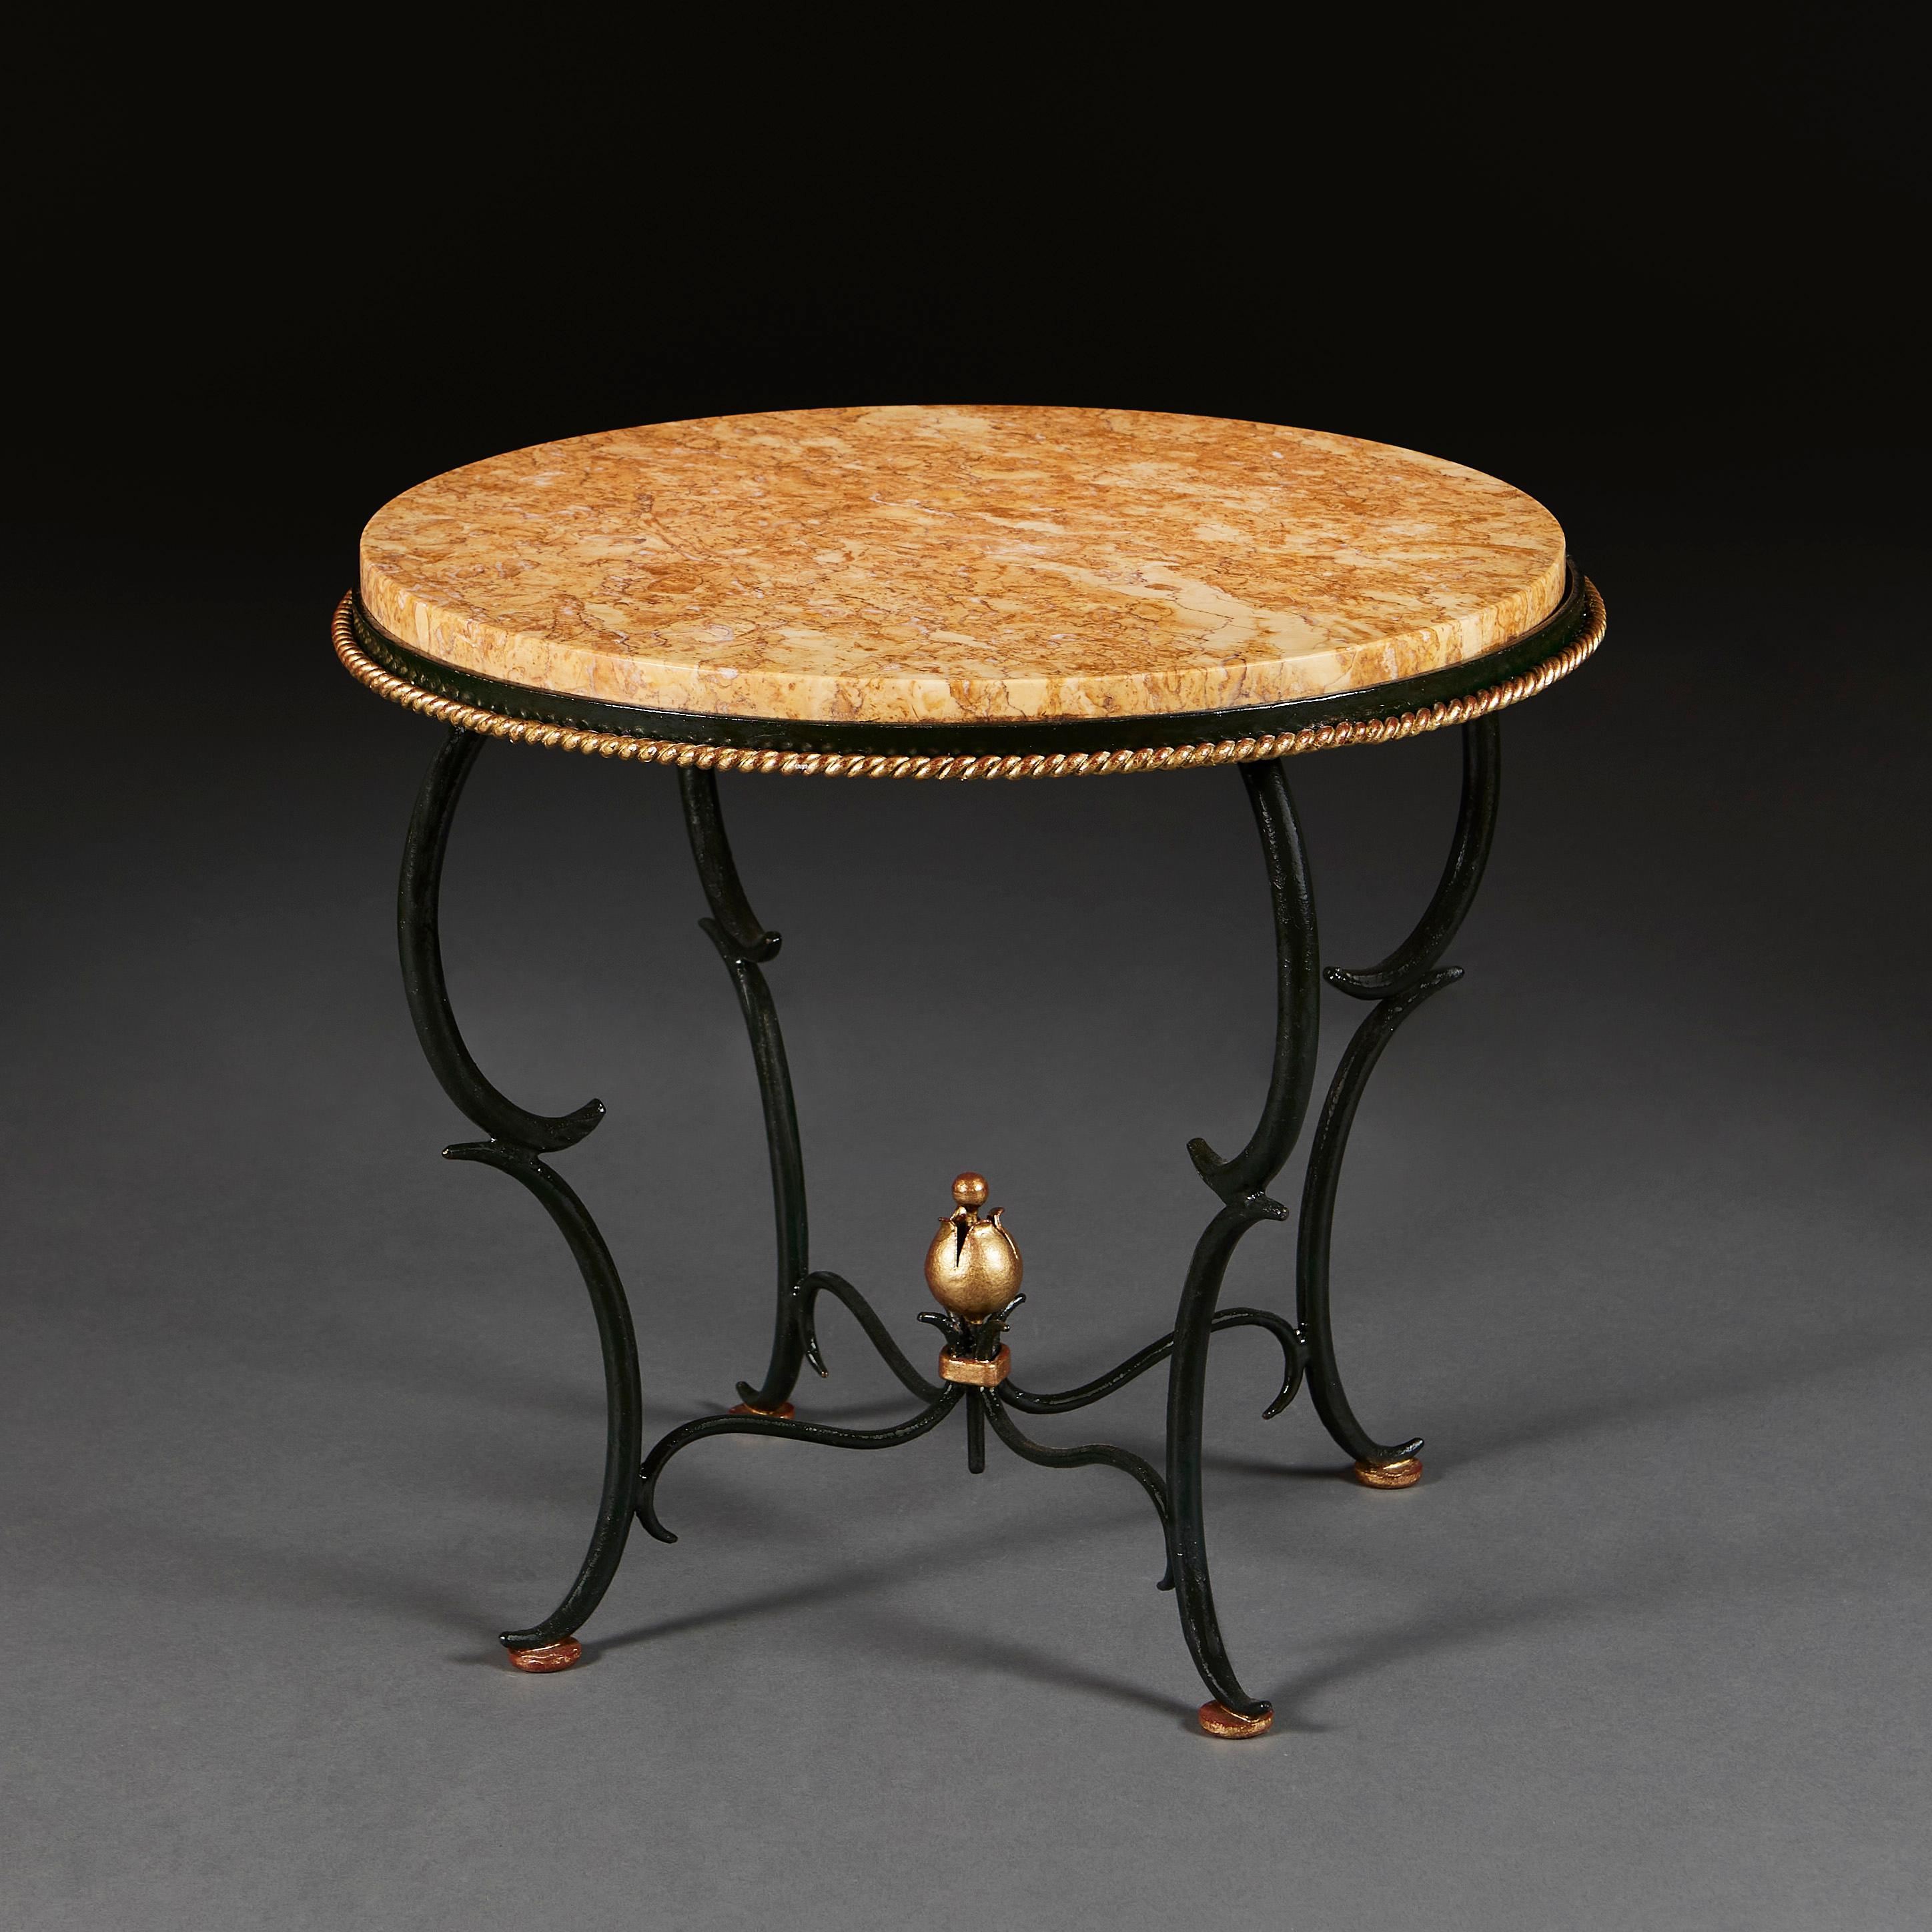 France, circa 1940  

A mid 20th century circular gueridon table with inset sienna marble top, with cross stretcher terminating in a gilded flower head. In the manner of Gilbert Poillerat.

Height 45.50cm
Diameter 53.00cm